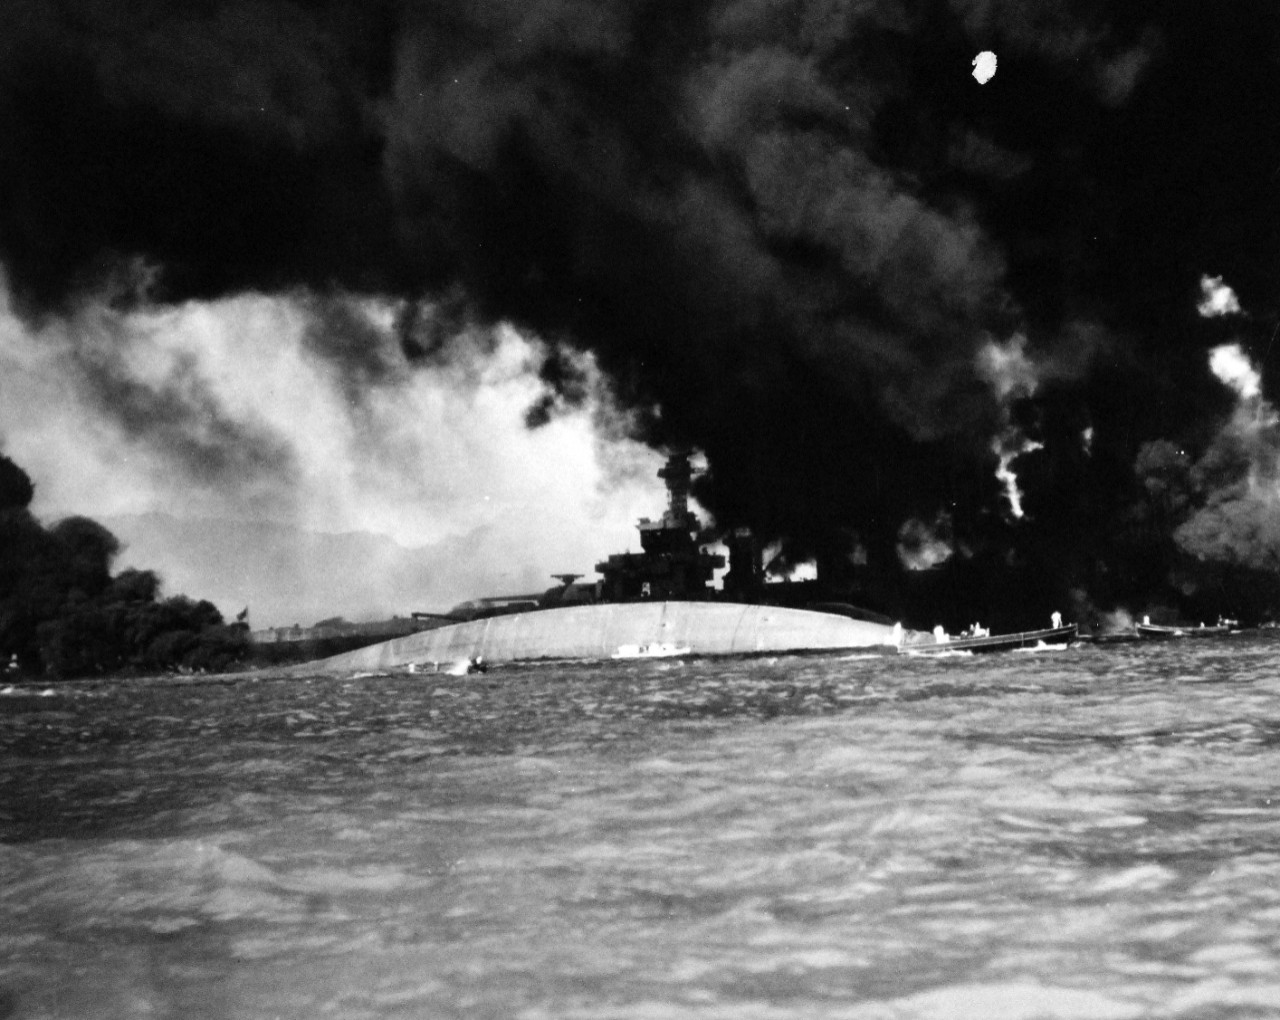 80-G-32415:  Japanese Attack on Pearl Harbor, December 7, 1941.   Capsized USS Oklahoma (BB 37) and USS Maryland (BB 46) after the attack. O fficial U.S. Navy photograph, now in the collections of the National Archives.   Official U.S. Navy photograph, now in the collections of the National Archives.  (9/15/15).